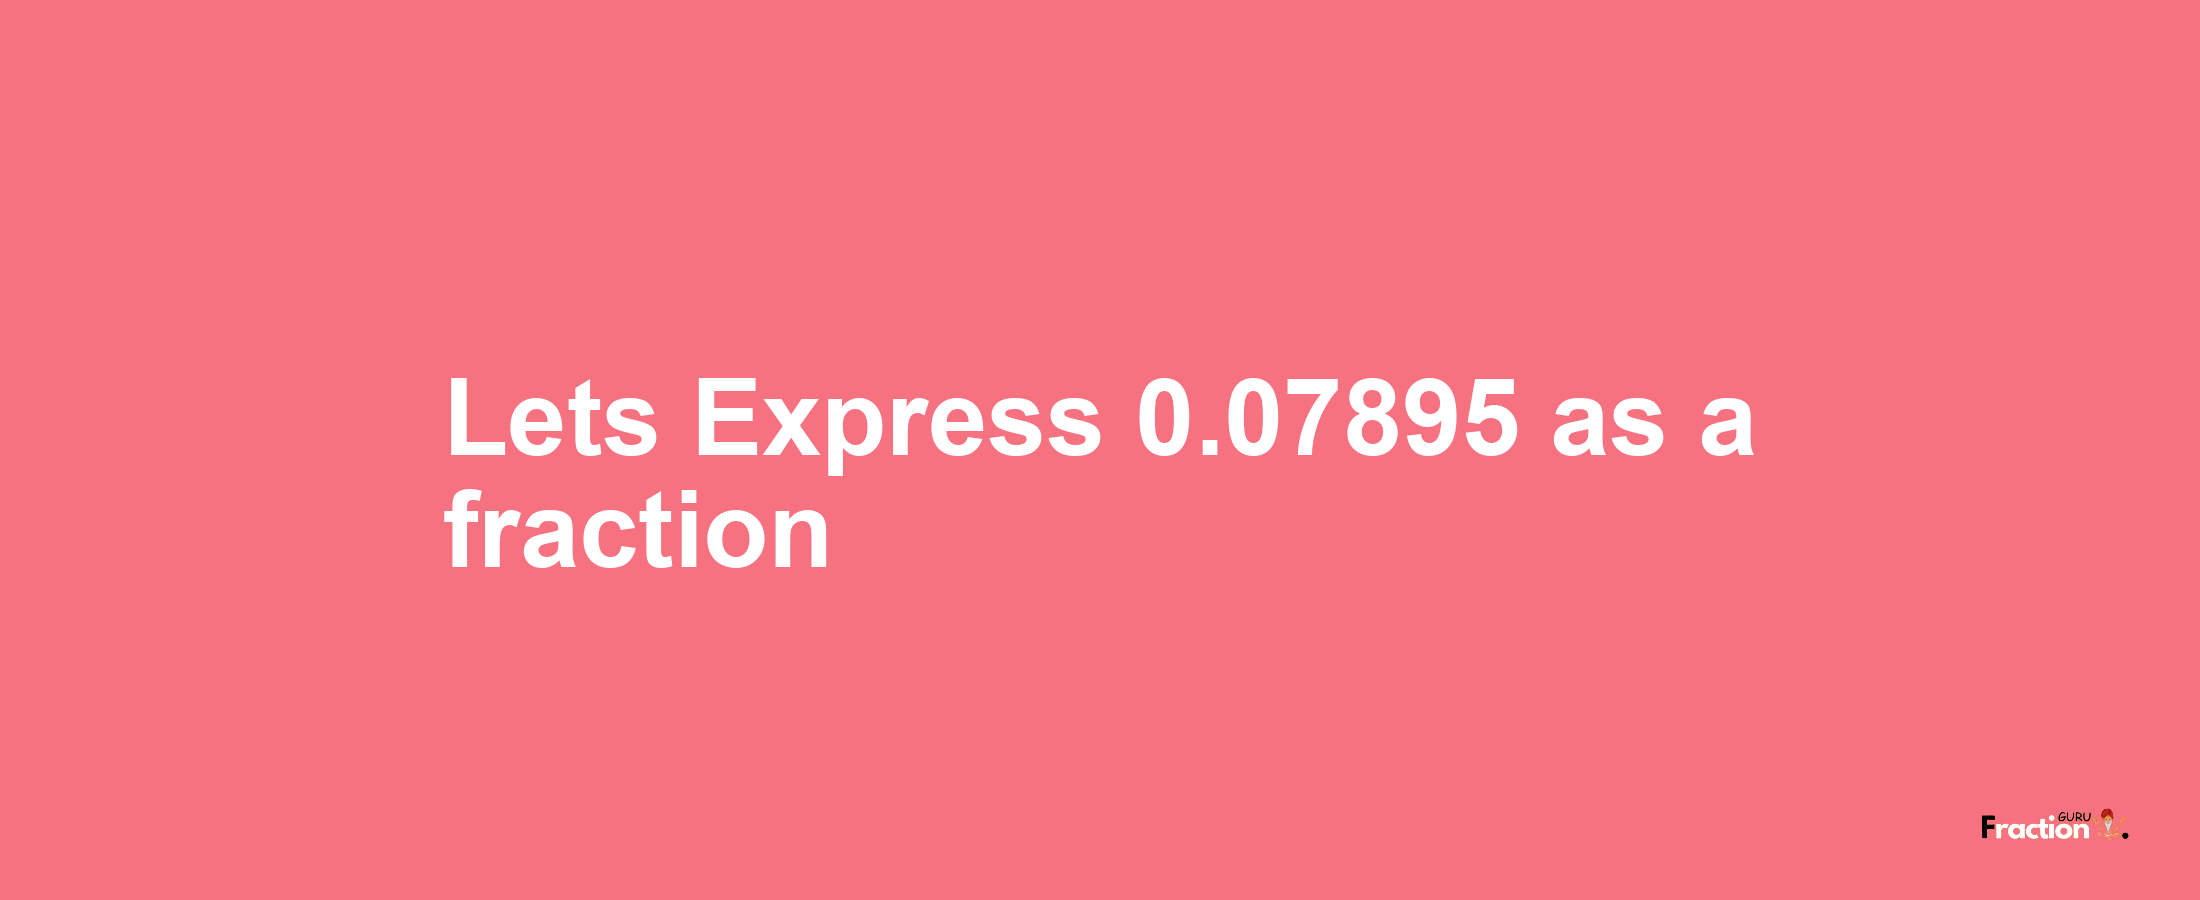 Lets Express 0.07895 as afraction